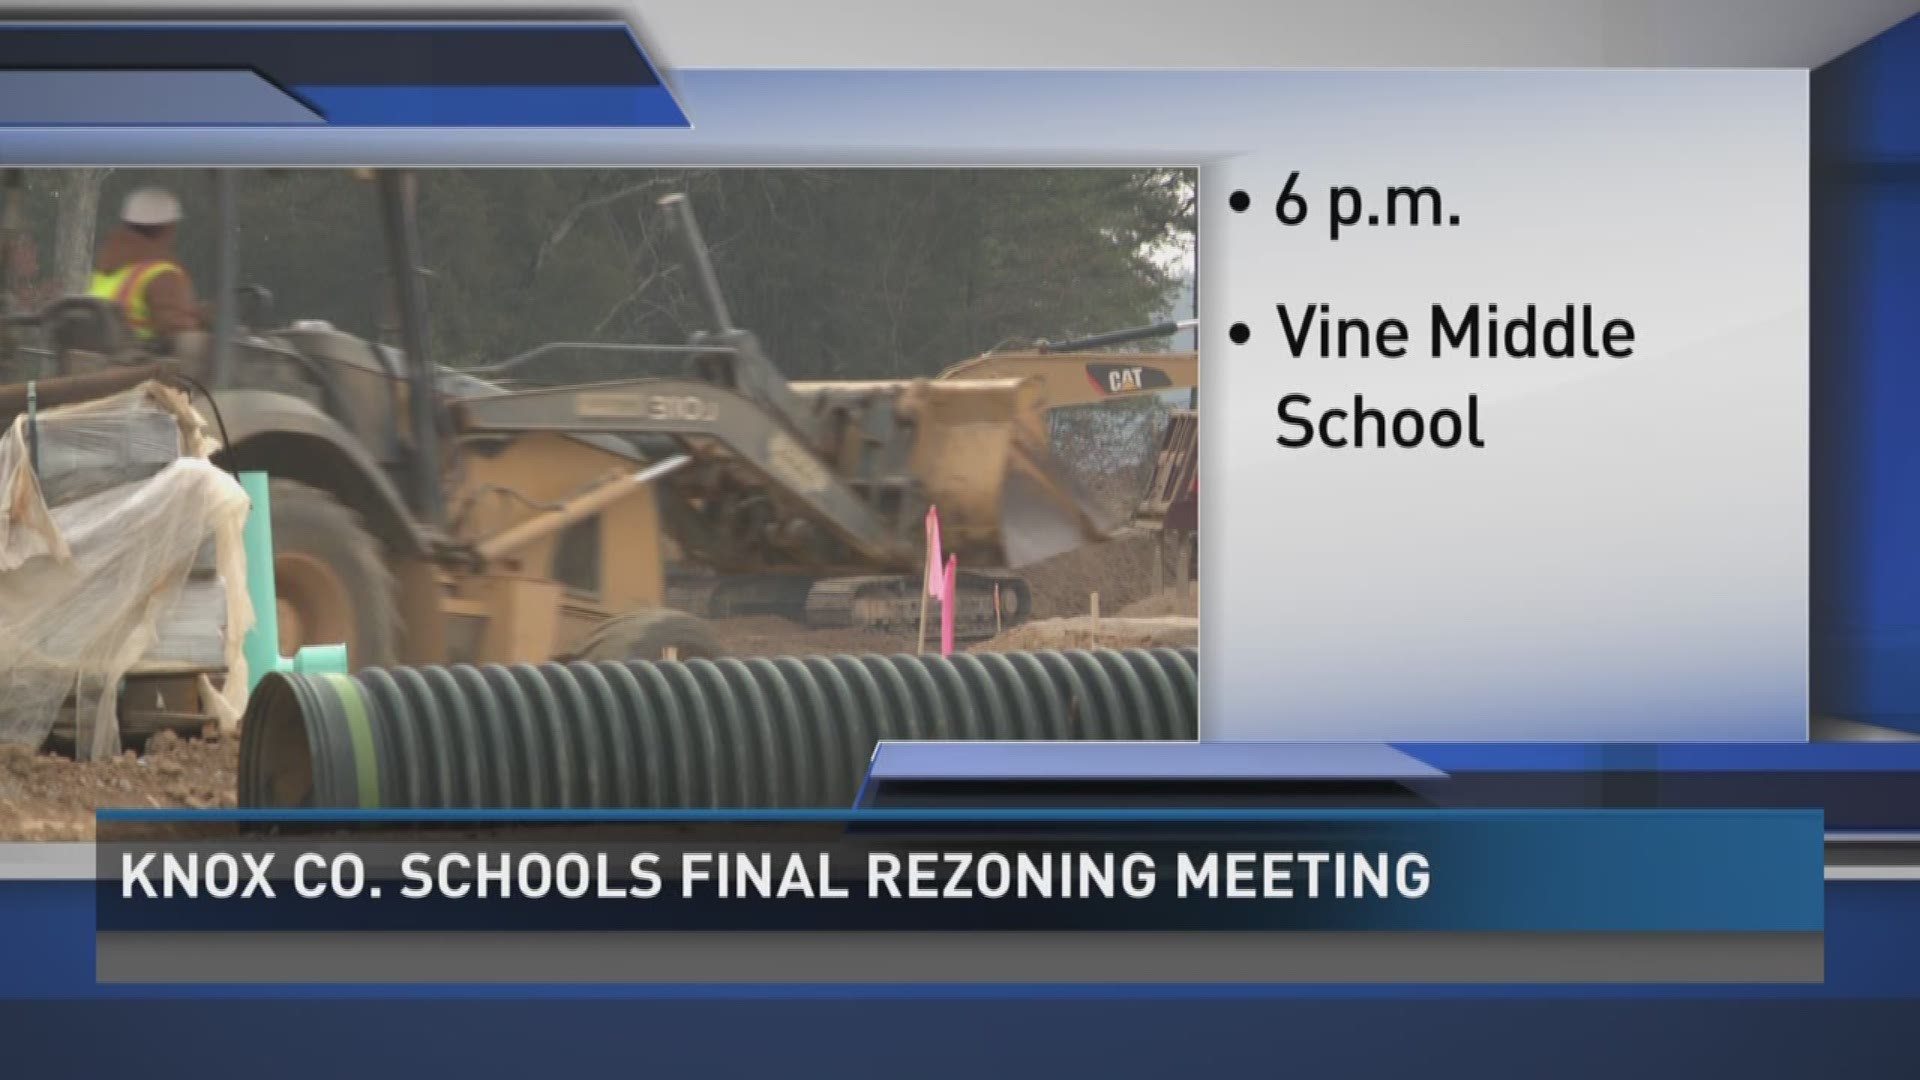 Jan. 30, 2017: Knox County parents and the community have one last chance to ask about middle school rezoning during a meeting Tuesday at Vine Middle School.